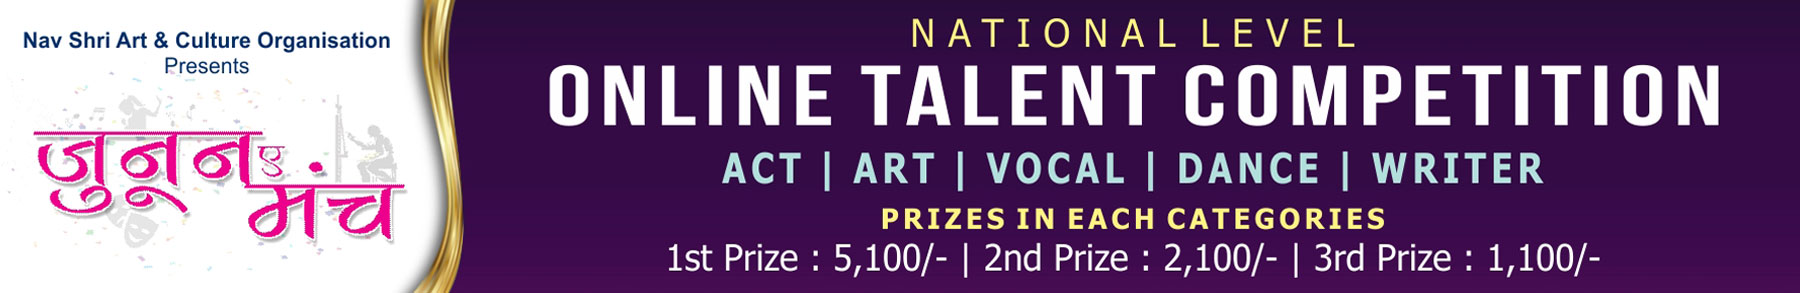 All India Online Talent Competition - Junoon-E-Manch, National Level Talent Competition